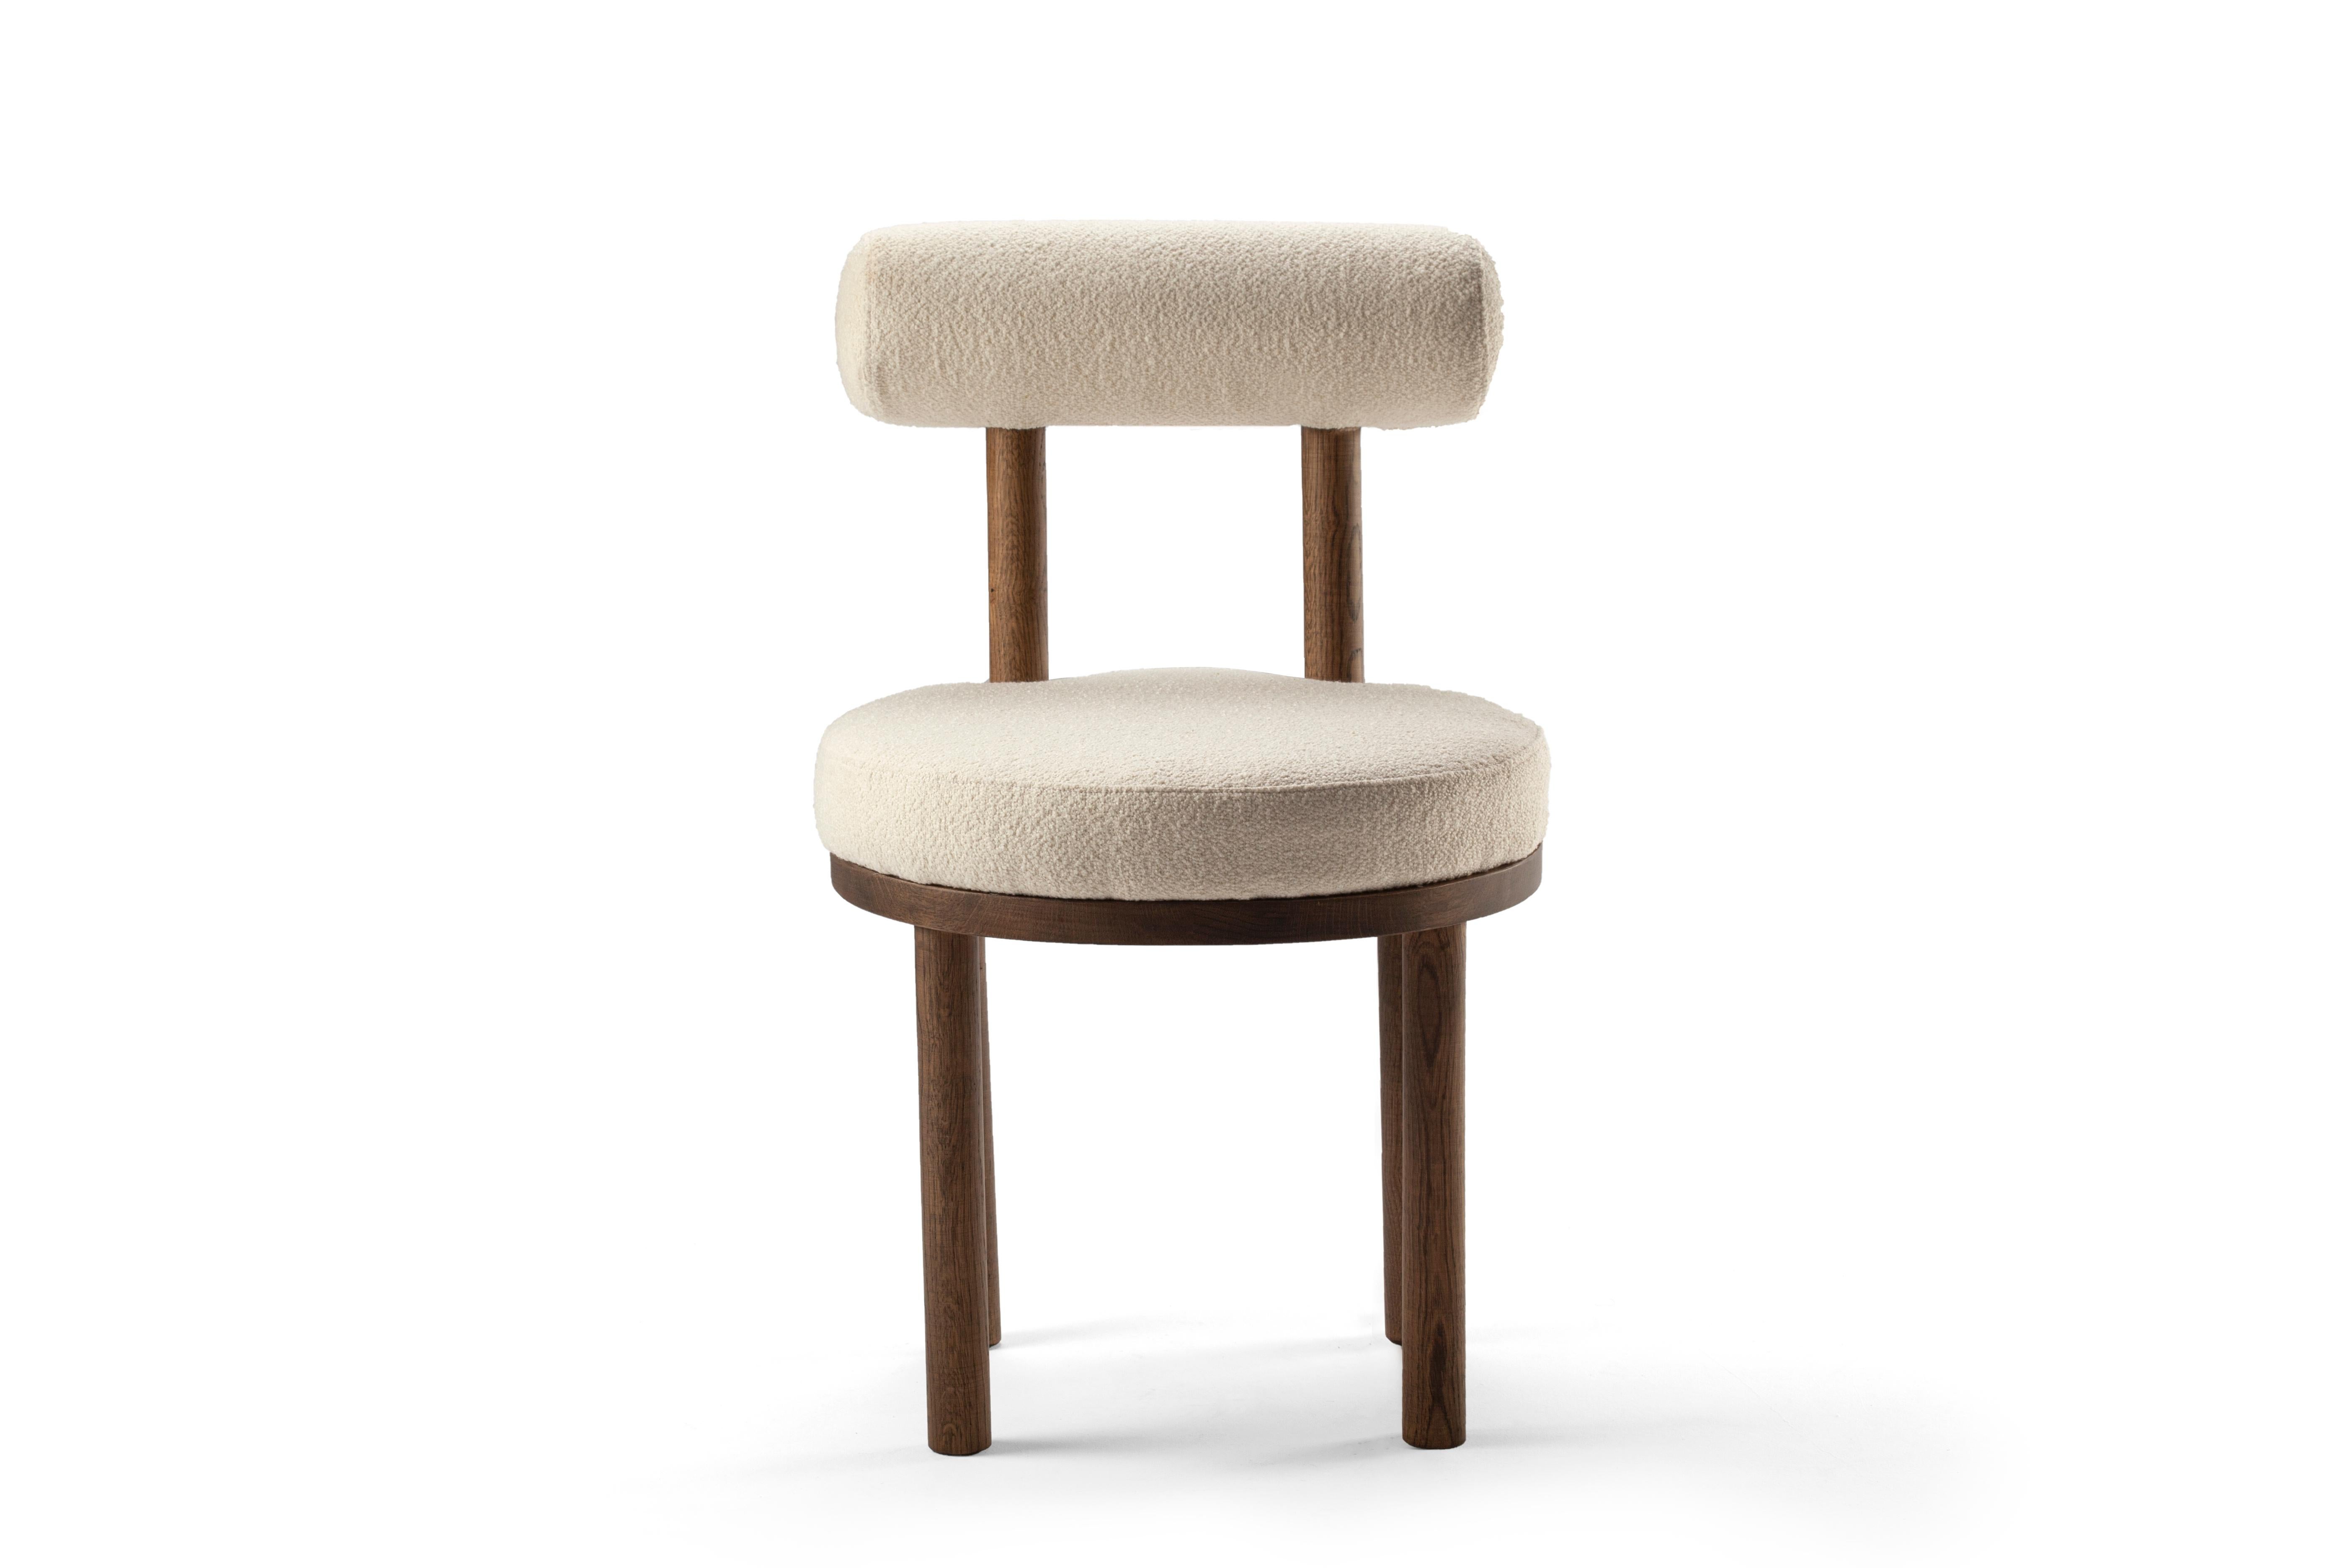 A chair that mixes both modern and classical design approaches.
Designed to hug the body, durable and solid chair features a body structure produced in solid wood.